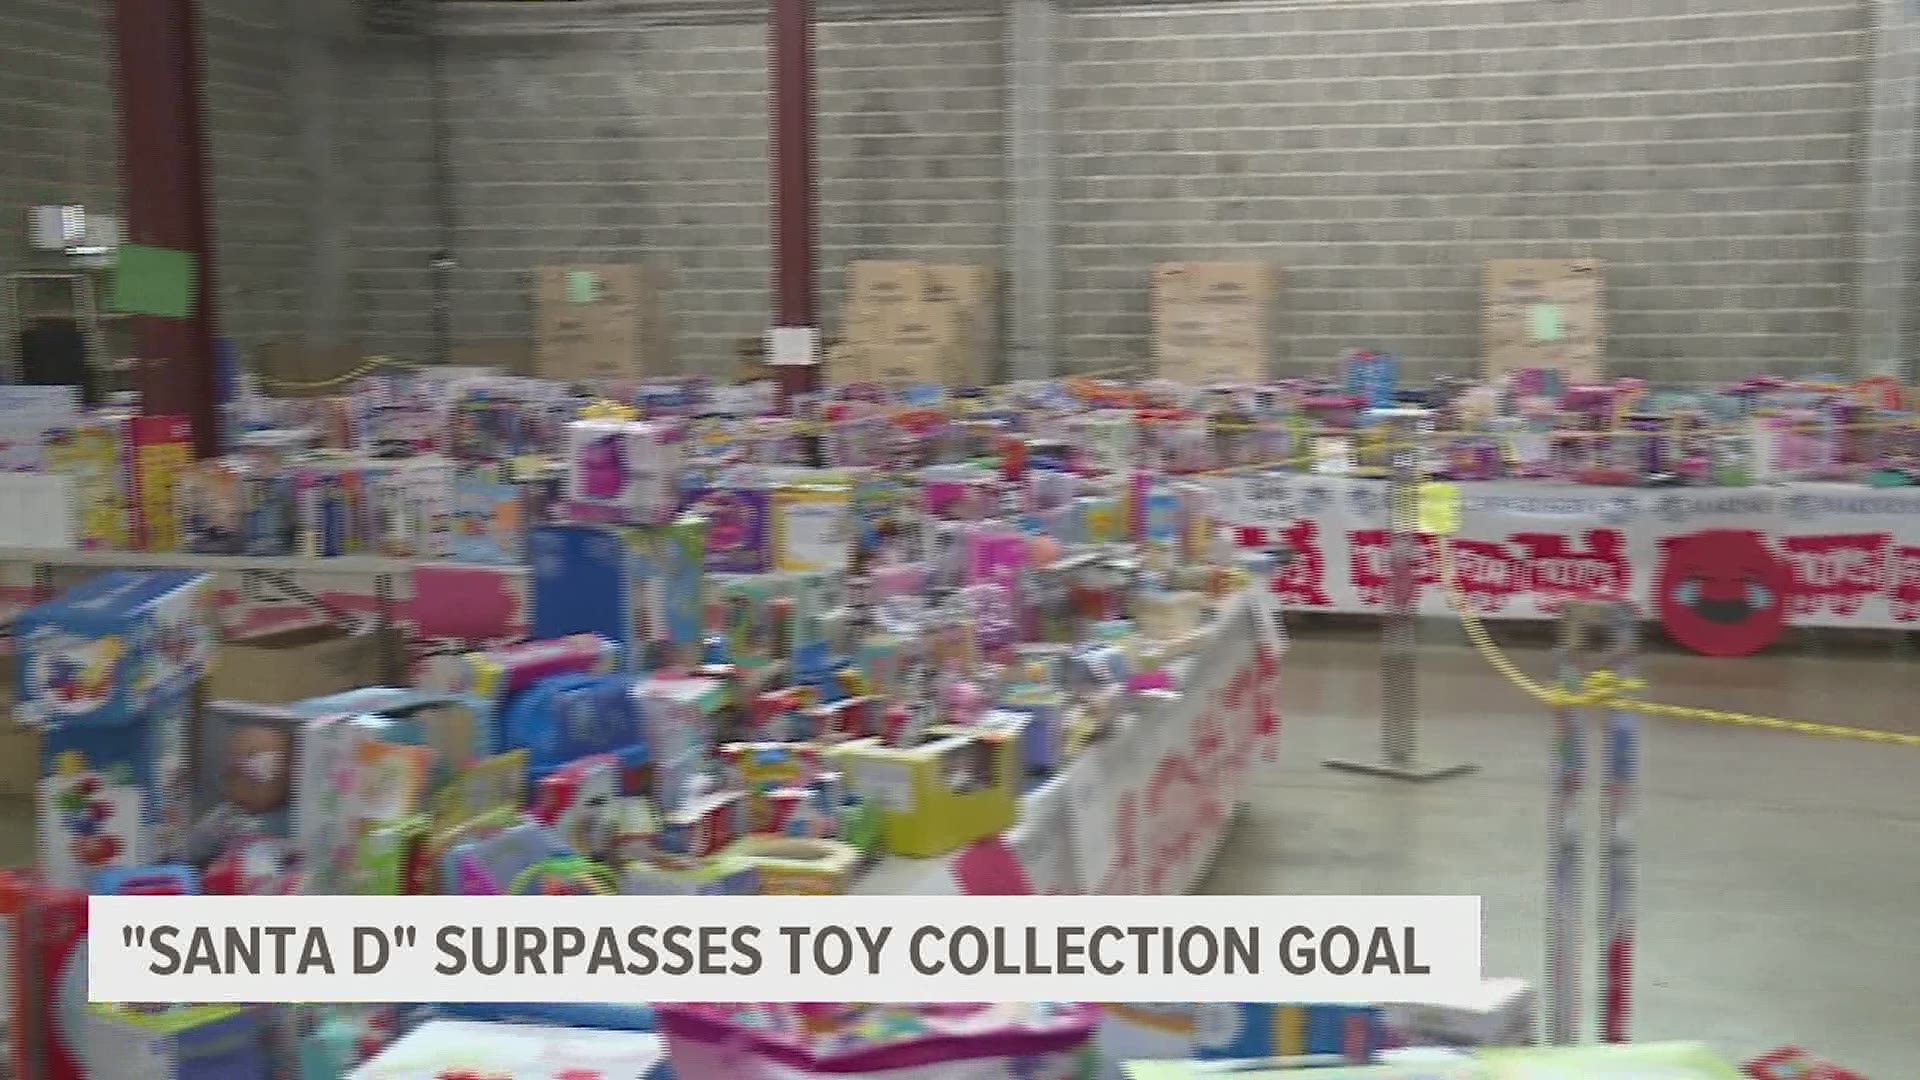 Over 9,200 toys and stocking stuffers were collected this year.